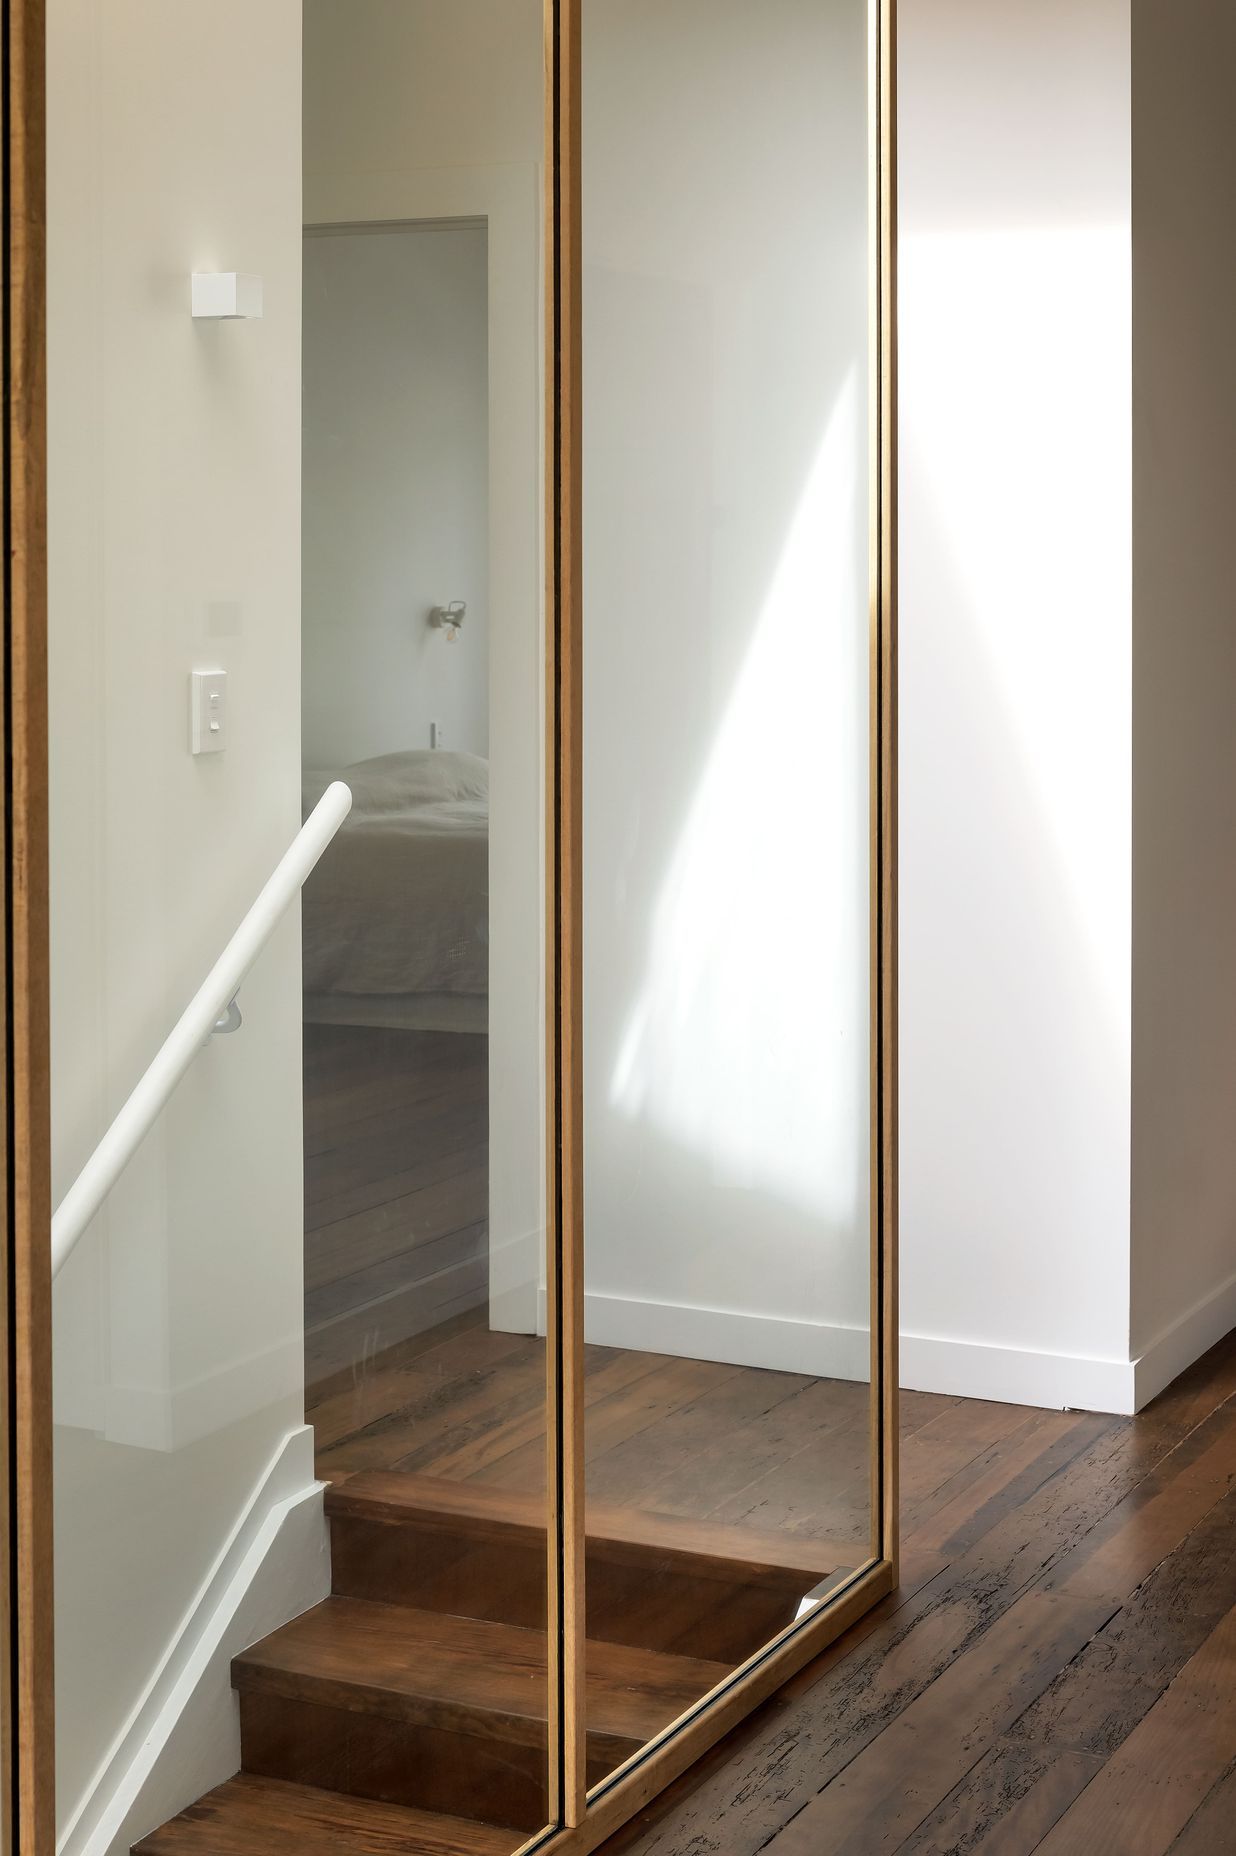 The stairwell skylight and glazing allow sunlight into the hallway. Photo: David Straight